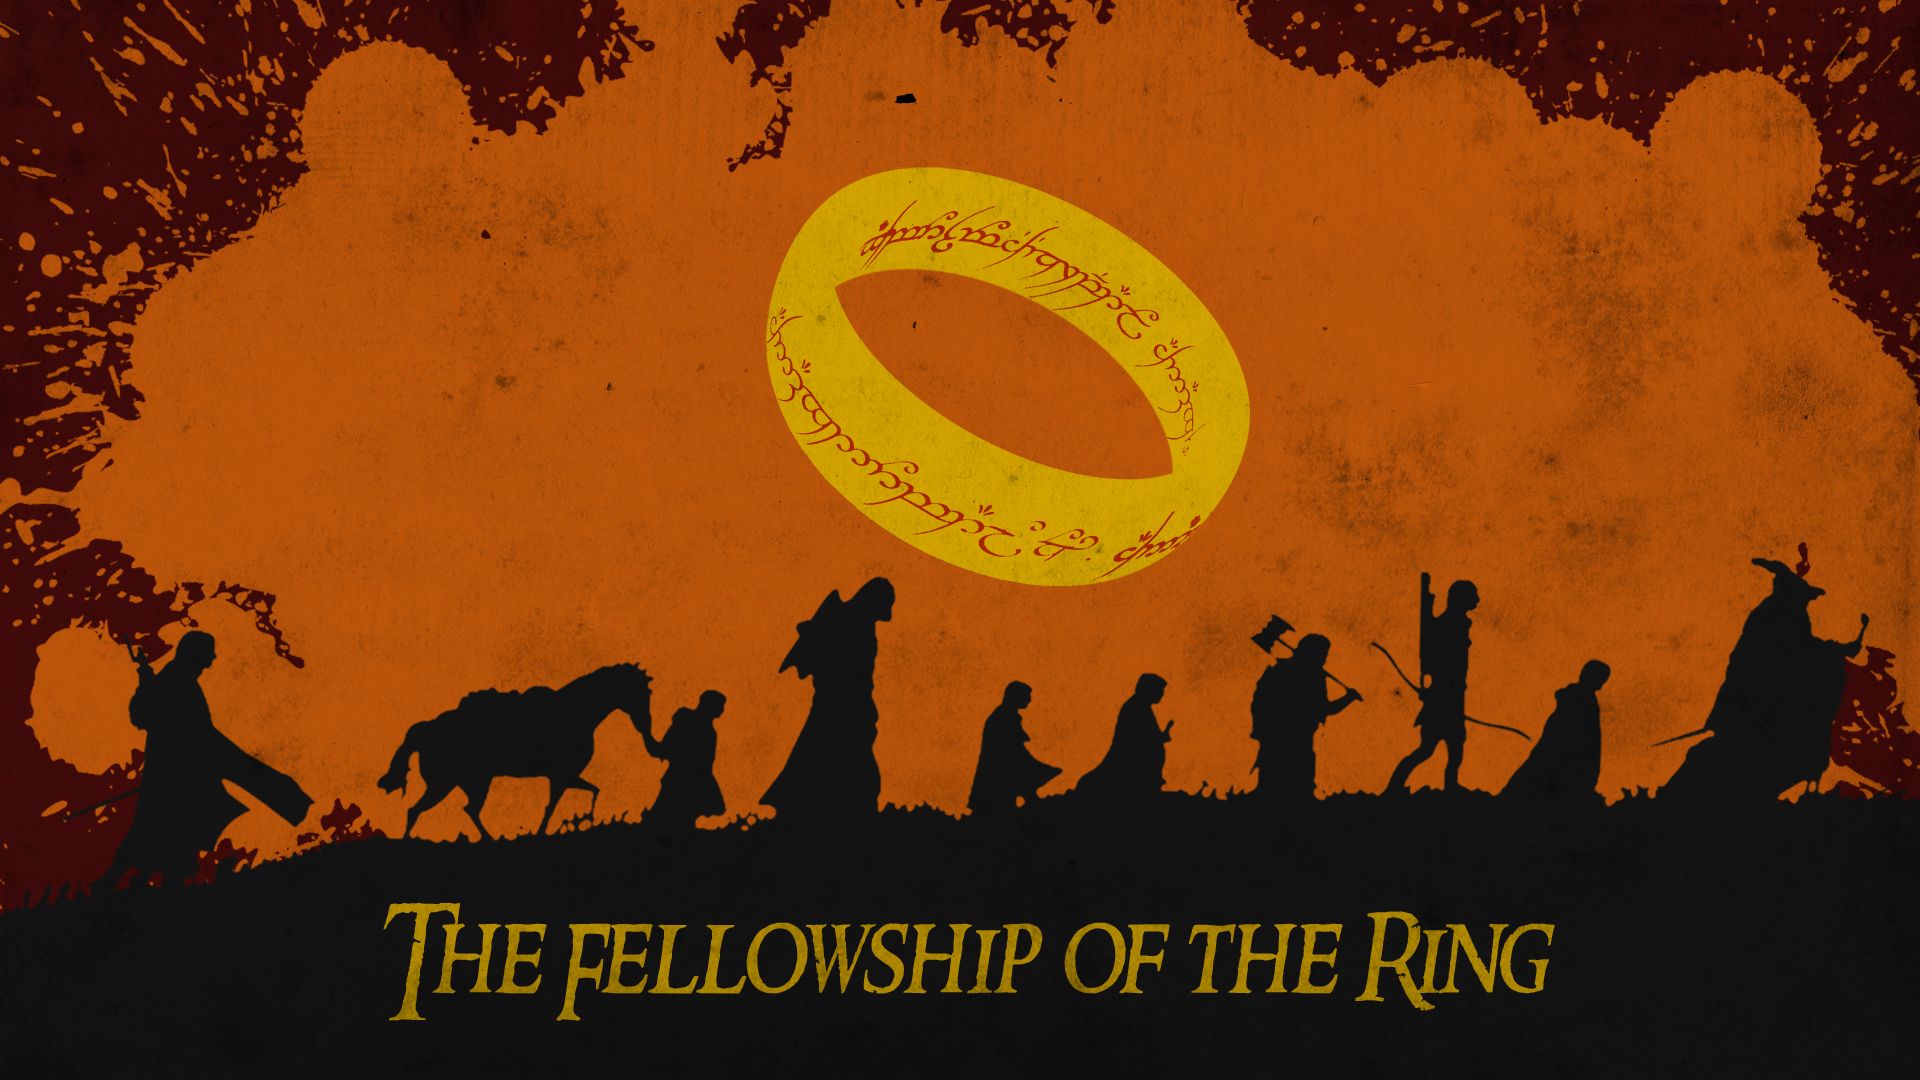 Minimalist Lord Of The Rings Wallpapers